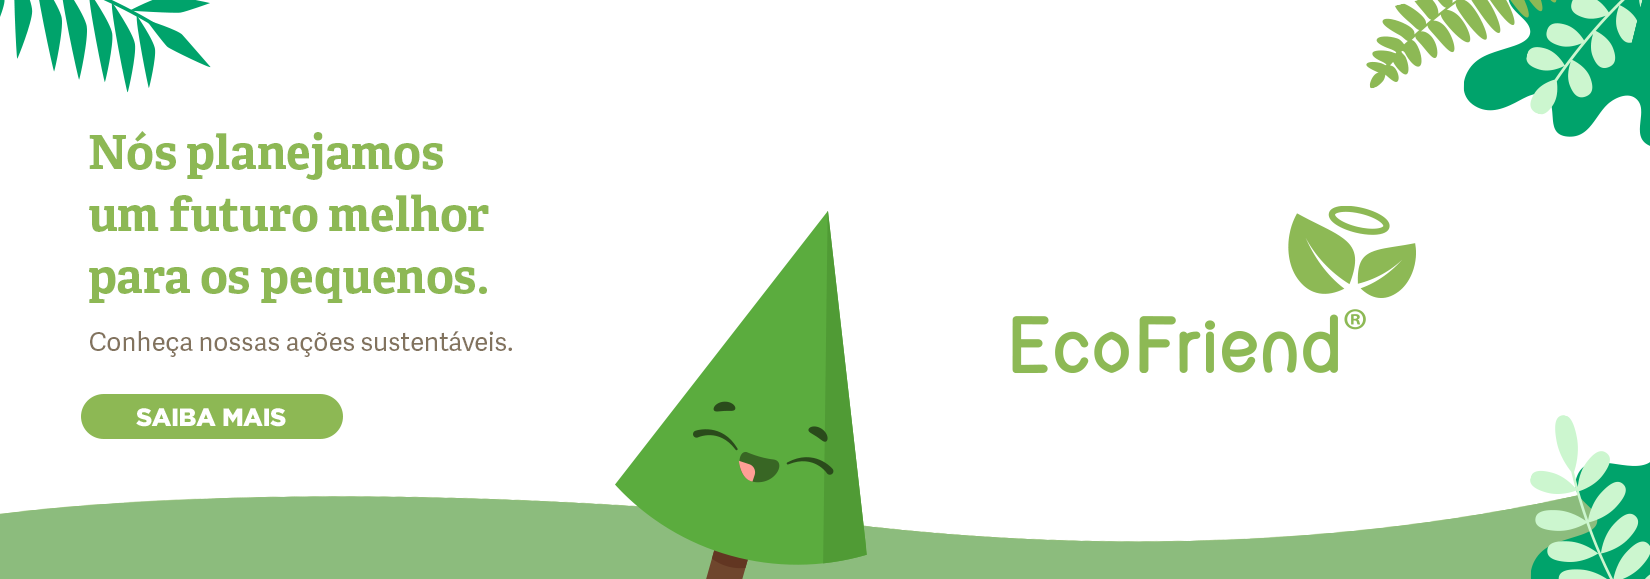 banner ecologia